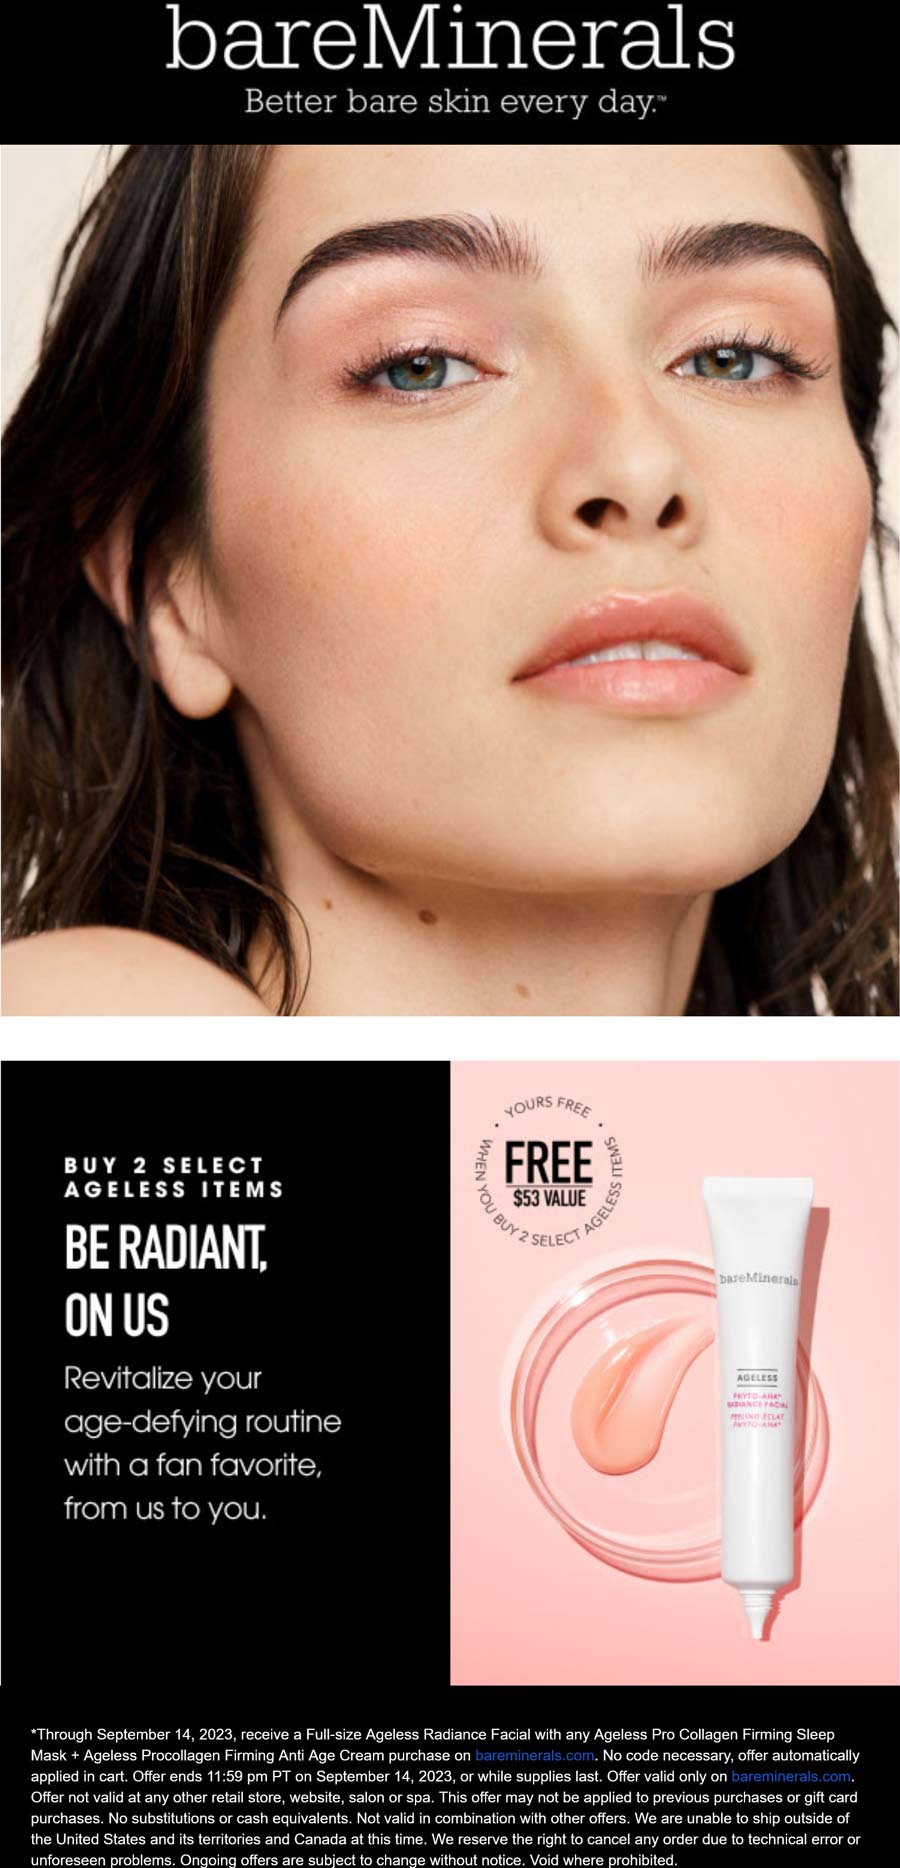 bareMinerals restaurants Coupon  Free full size facial with your mask & cream order at bareMinerals #bareminerals 